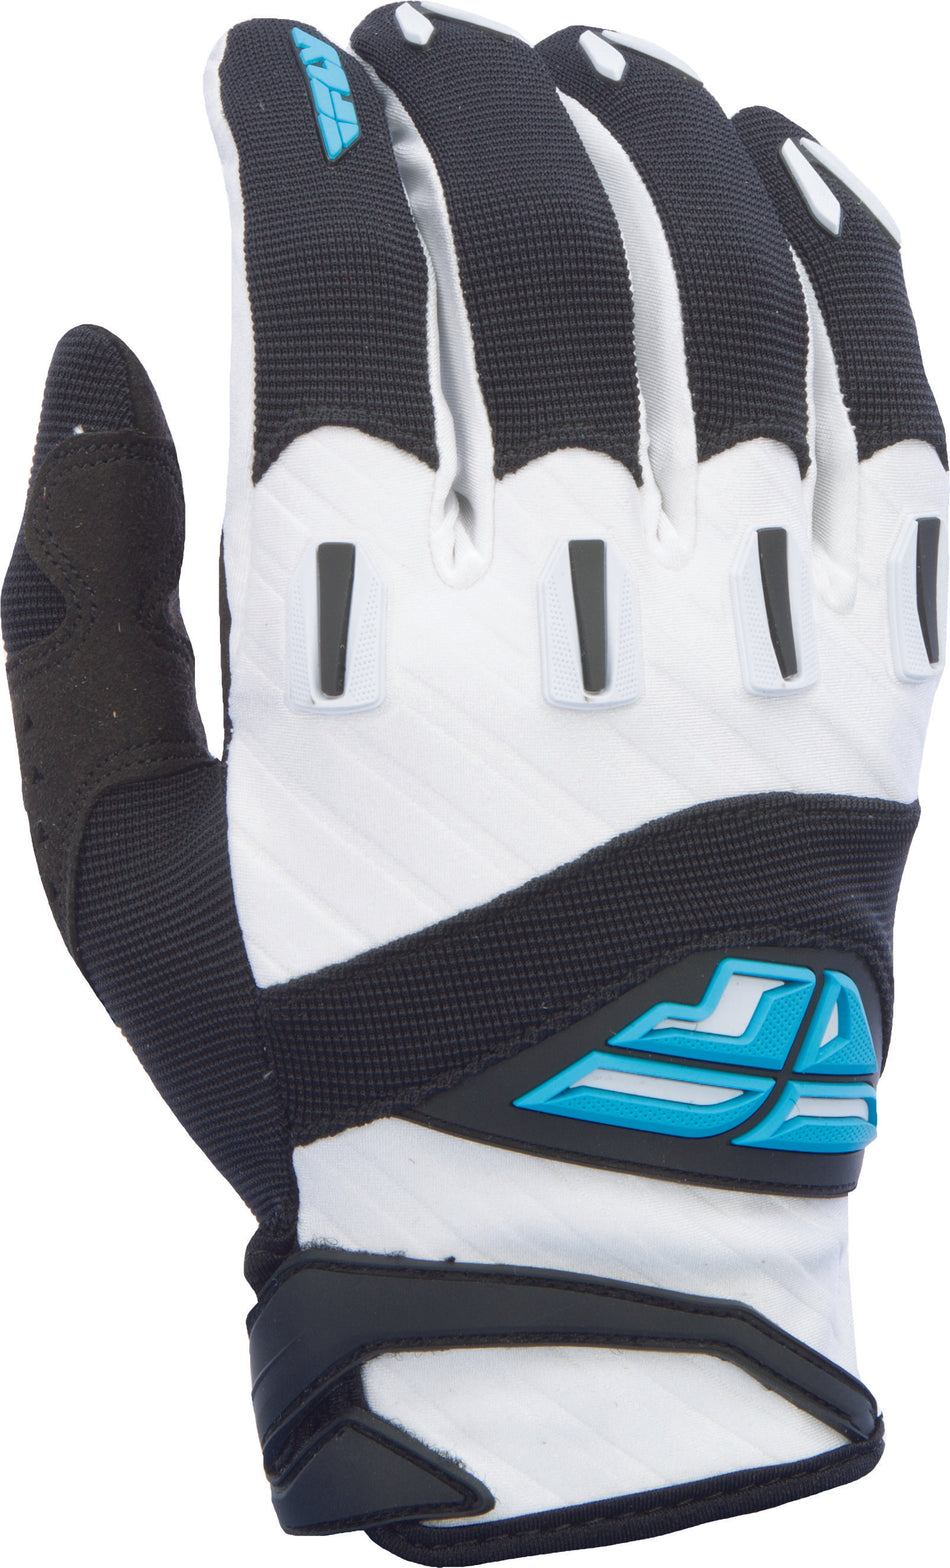 FLY RACING Youth F-16 Glove Black/White Sz 1 Y3xs 370-91001